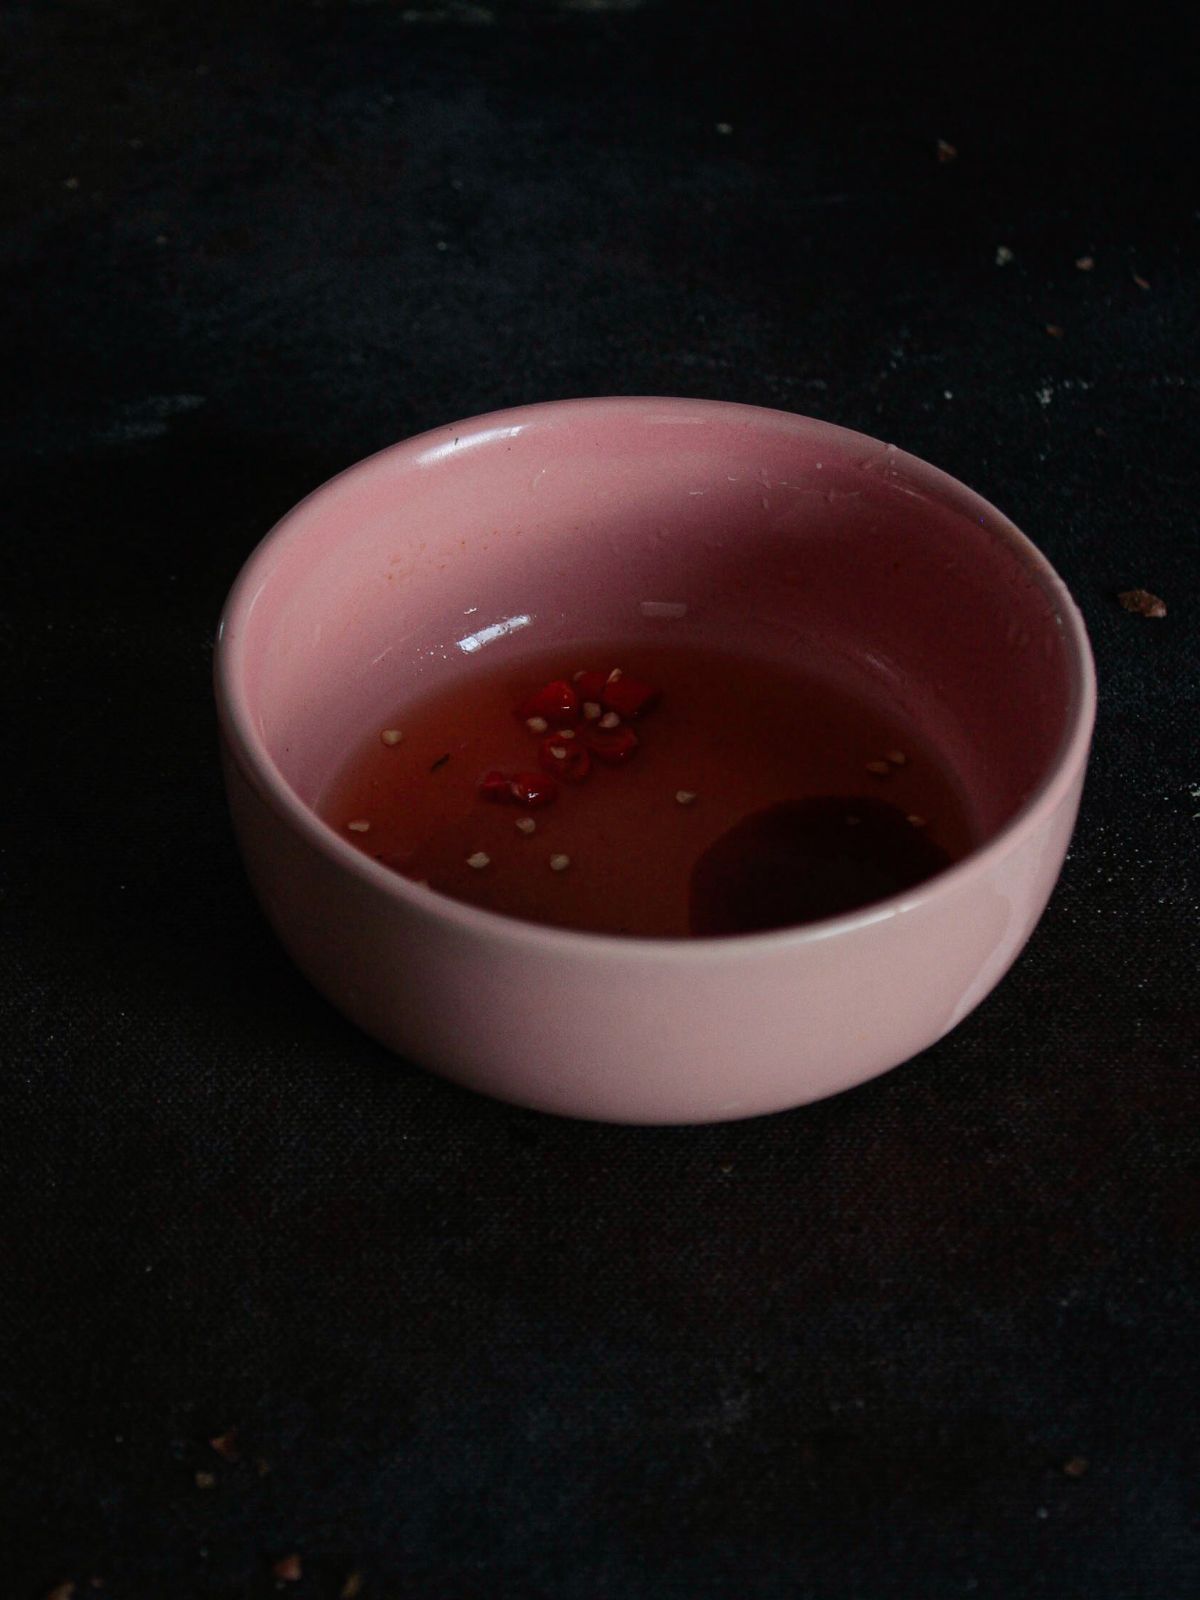 dipping sauce in pink bowl on black surface